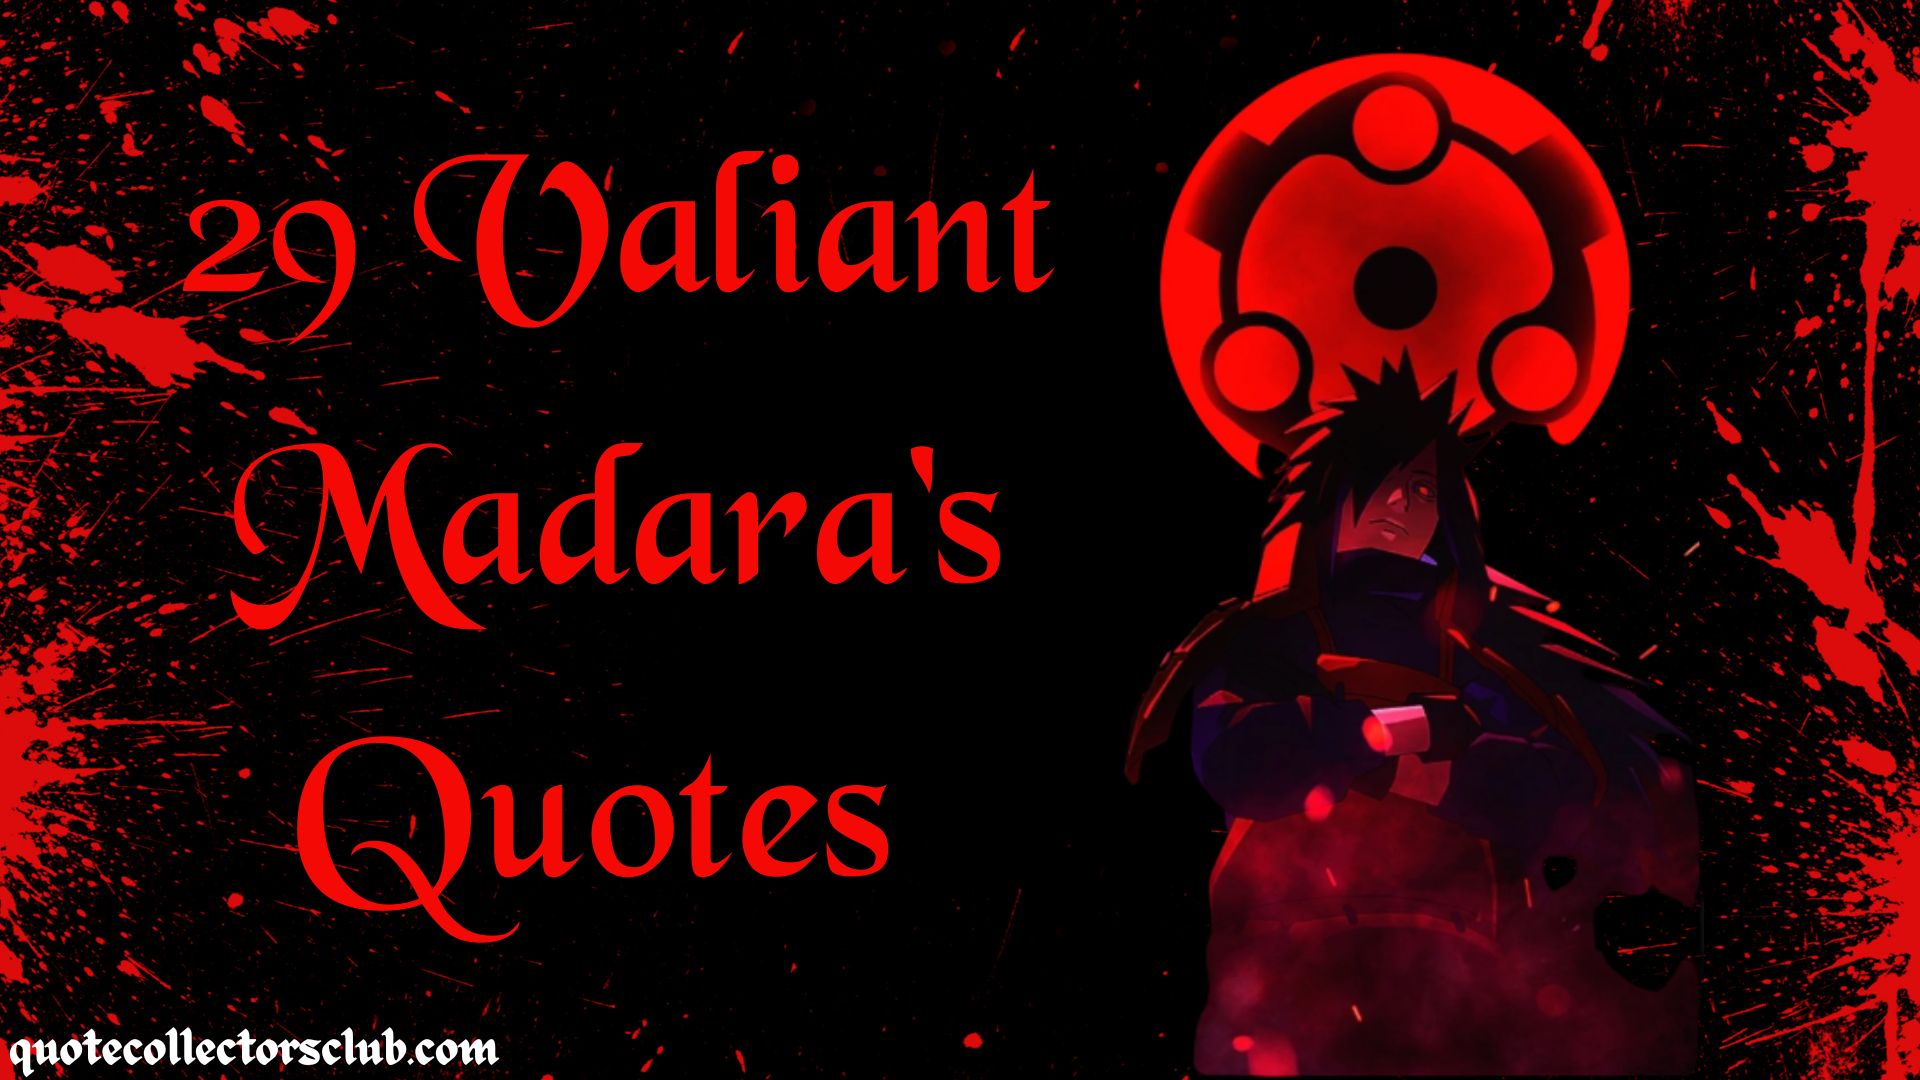 29 Valiant Madara's Quotes From the Anime Naruto To Remember